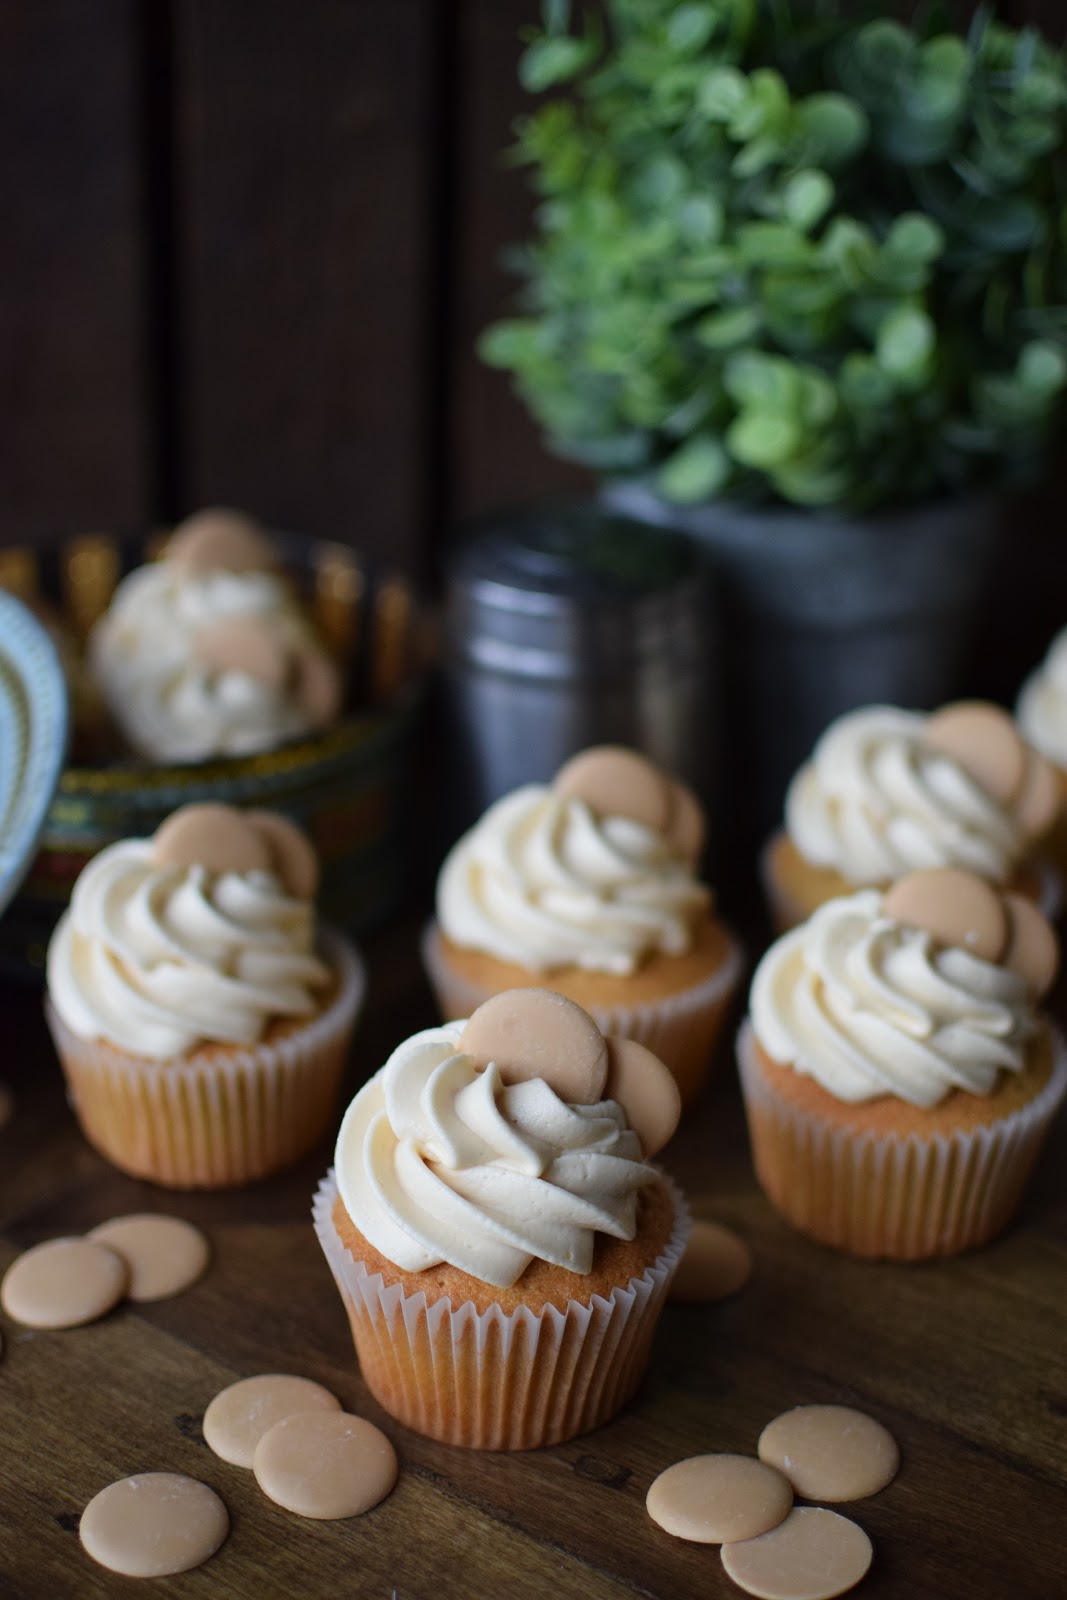 A retro treat turned cupcake, Caramac's have never tasted so good.